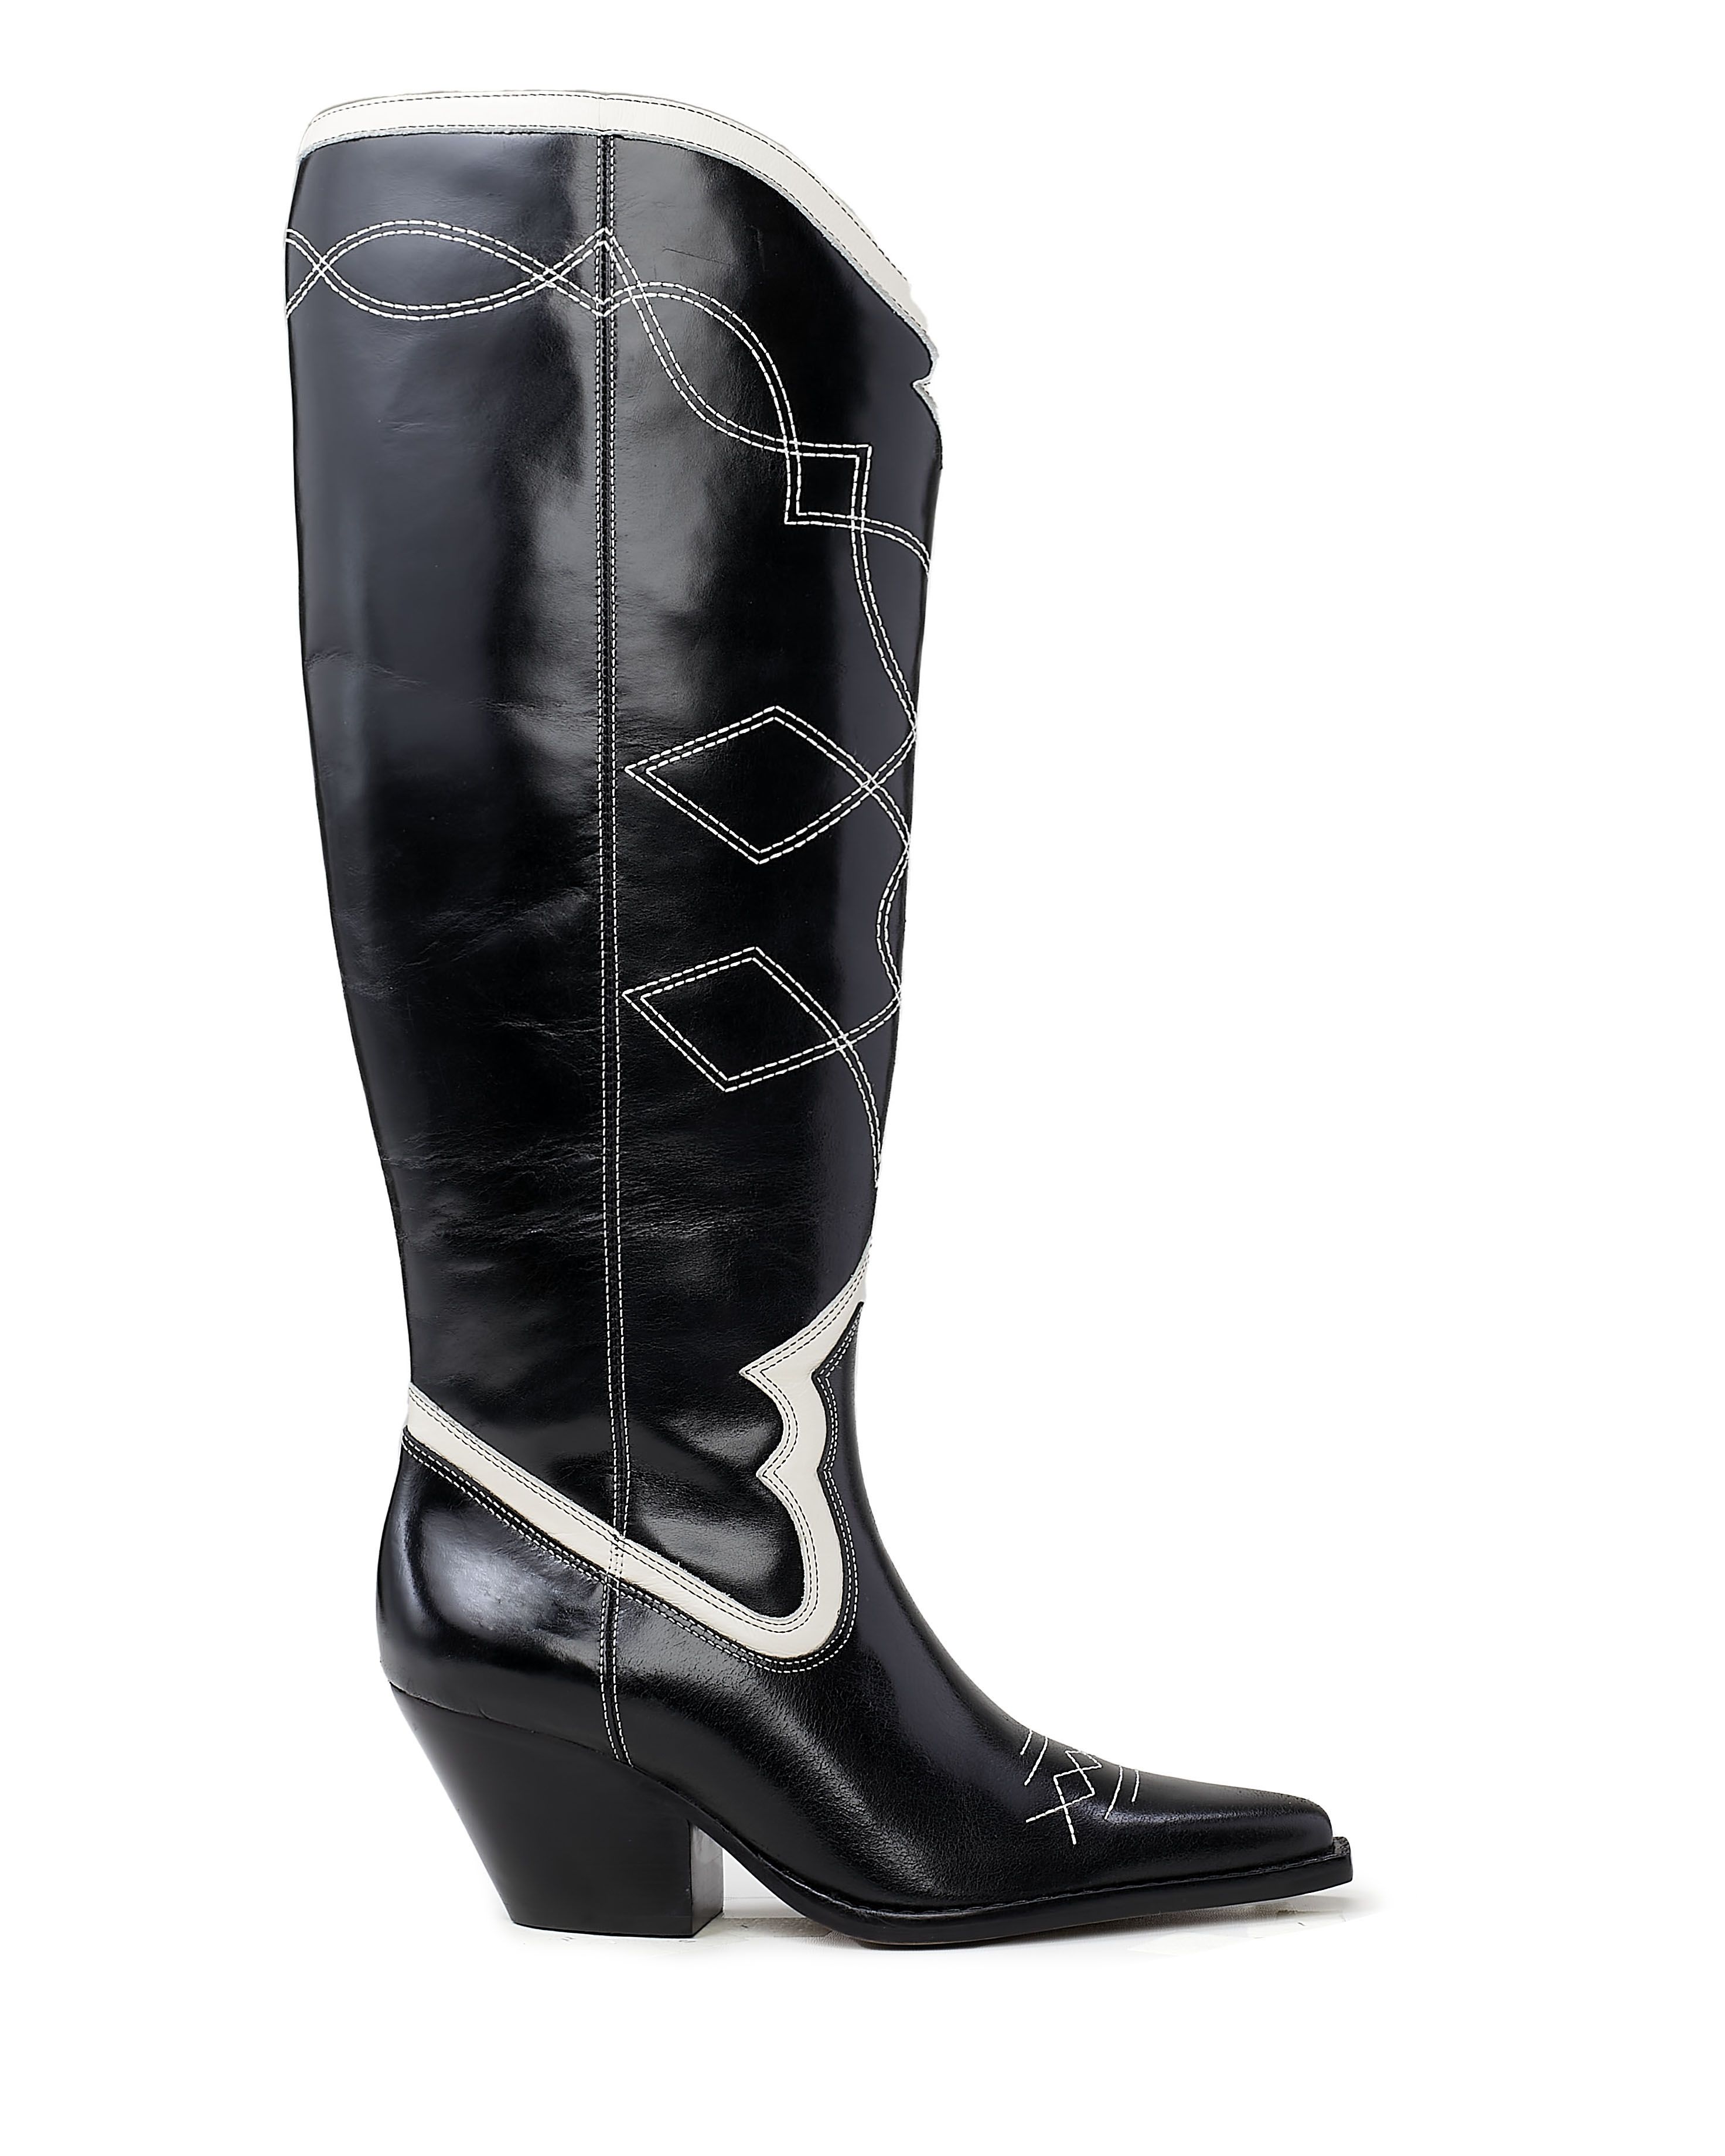 Vince Camuto Nedema2 Wide-calf Boot | Vince Camuto